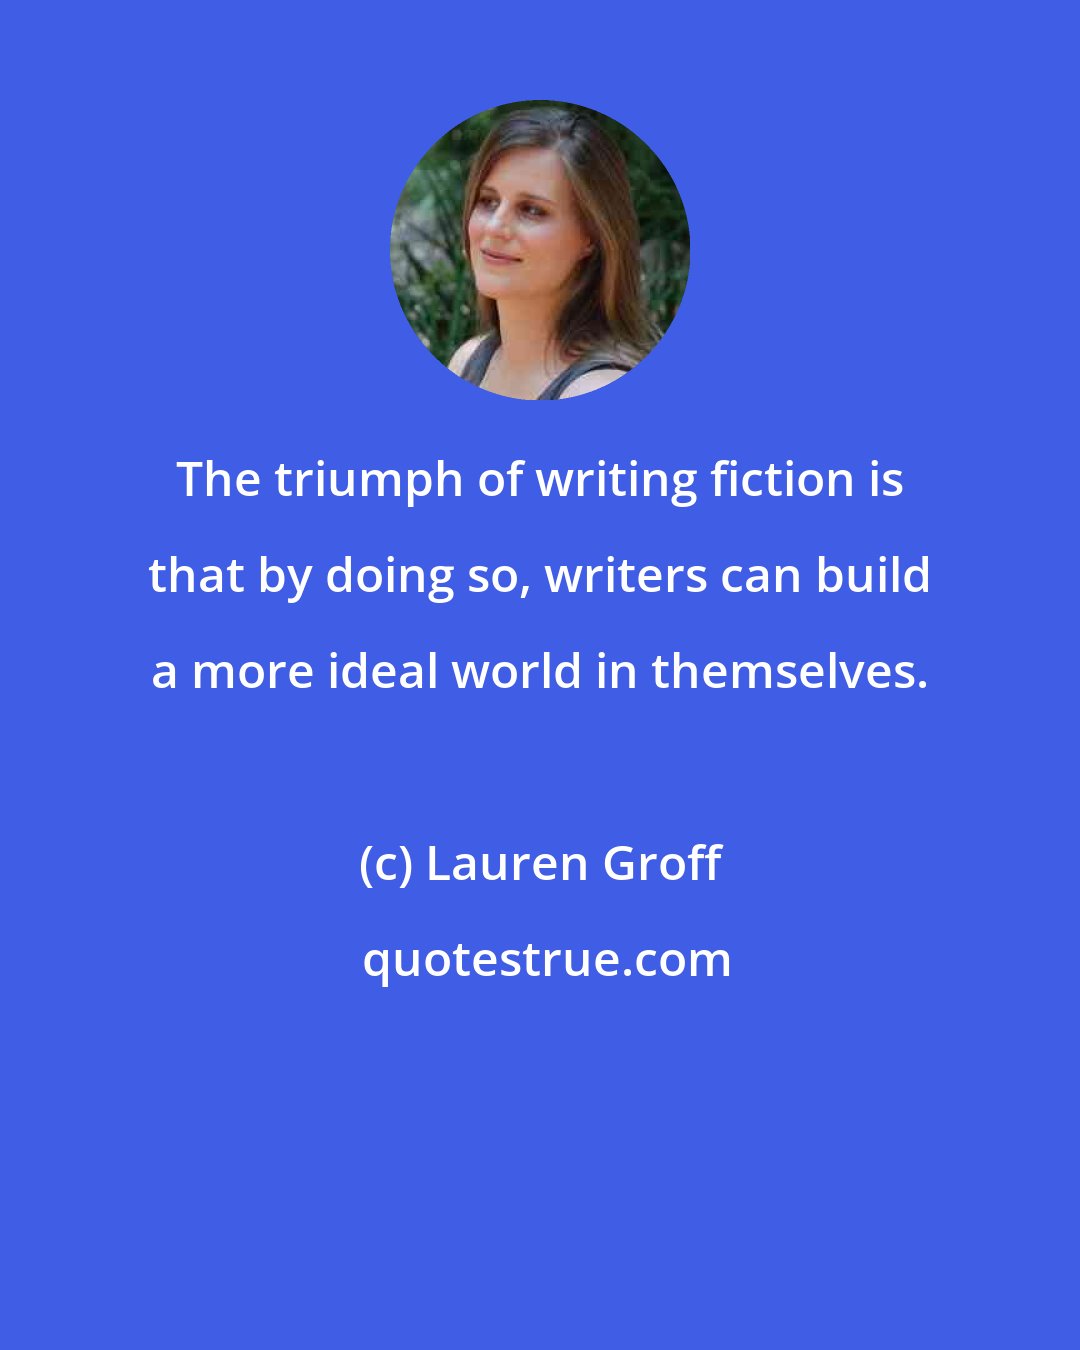 Lauren Groff: The triumph of writing fiction is that by doing so, writers can build a more ideal world in themselves.